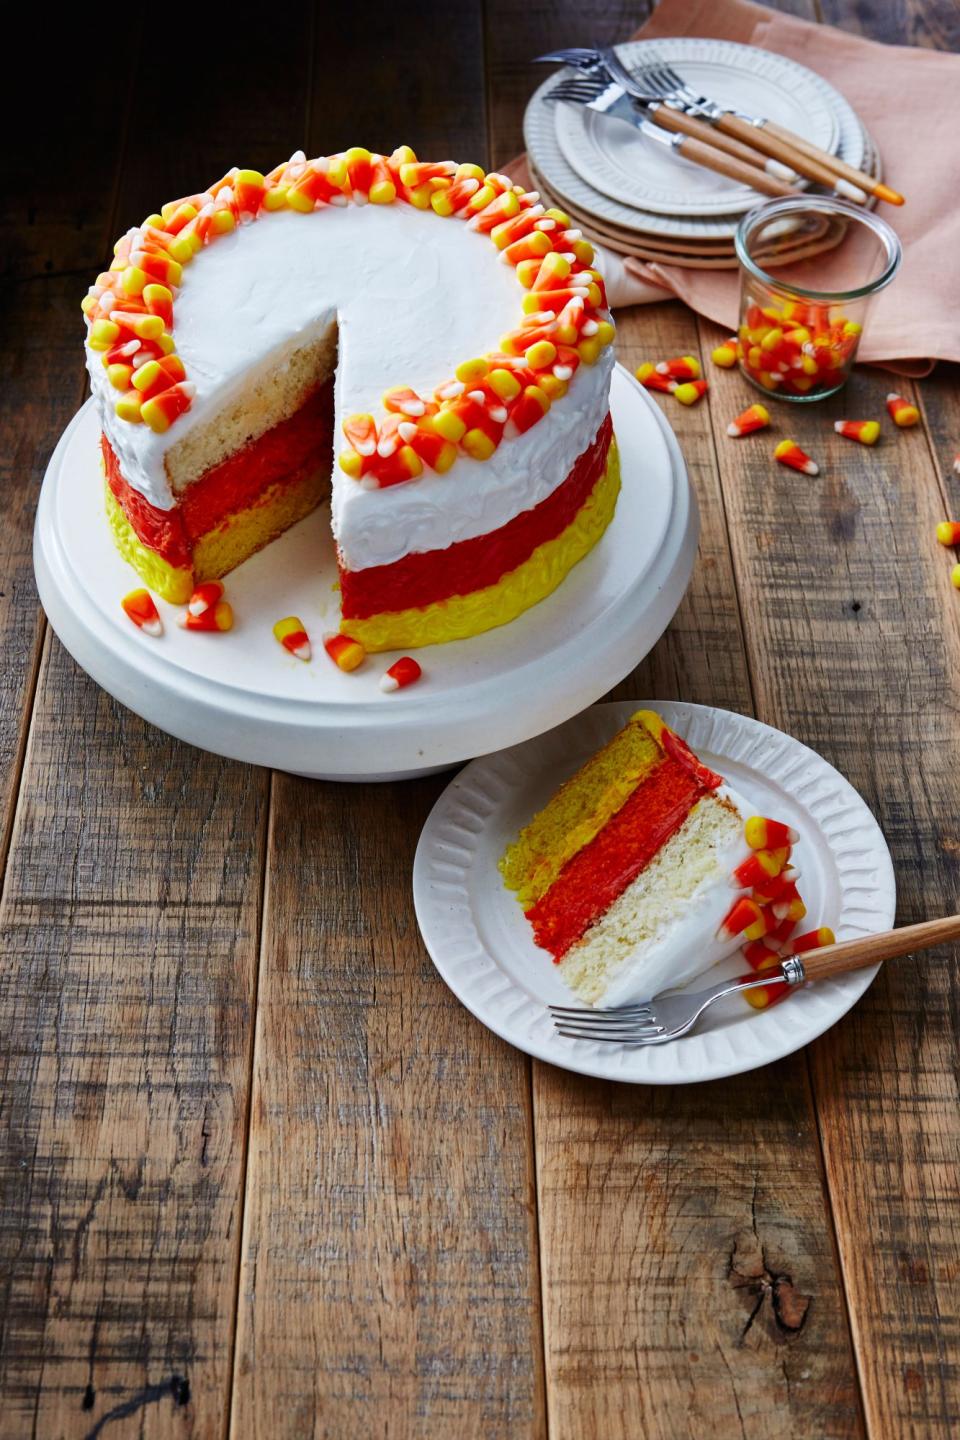 18 Halloween Cake Ideas That Are Frightfully Delicious